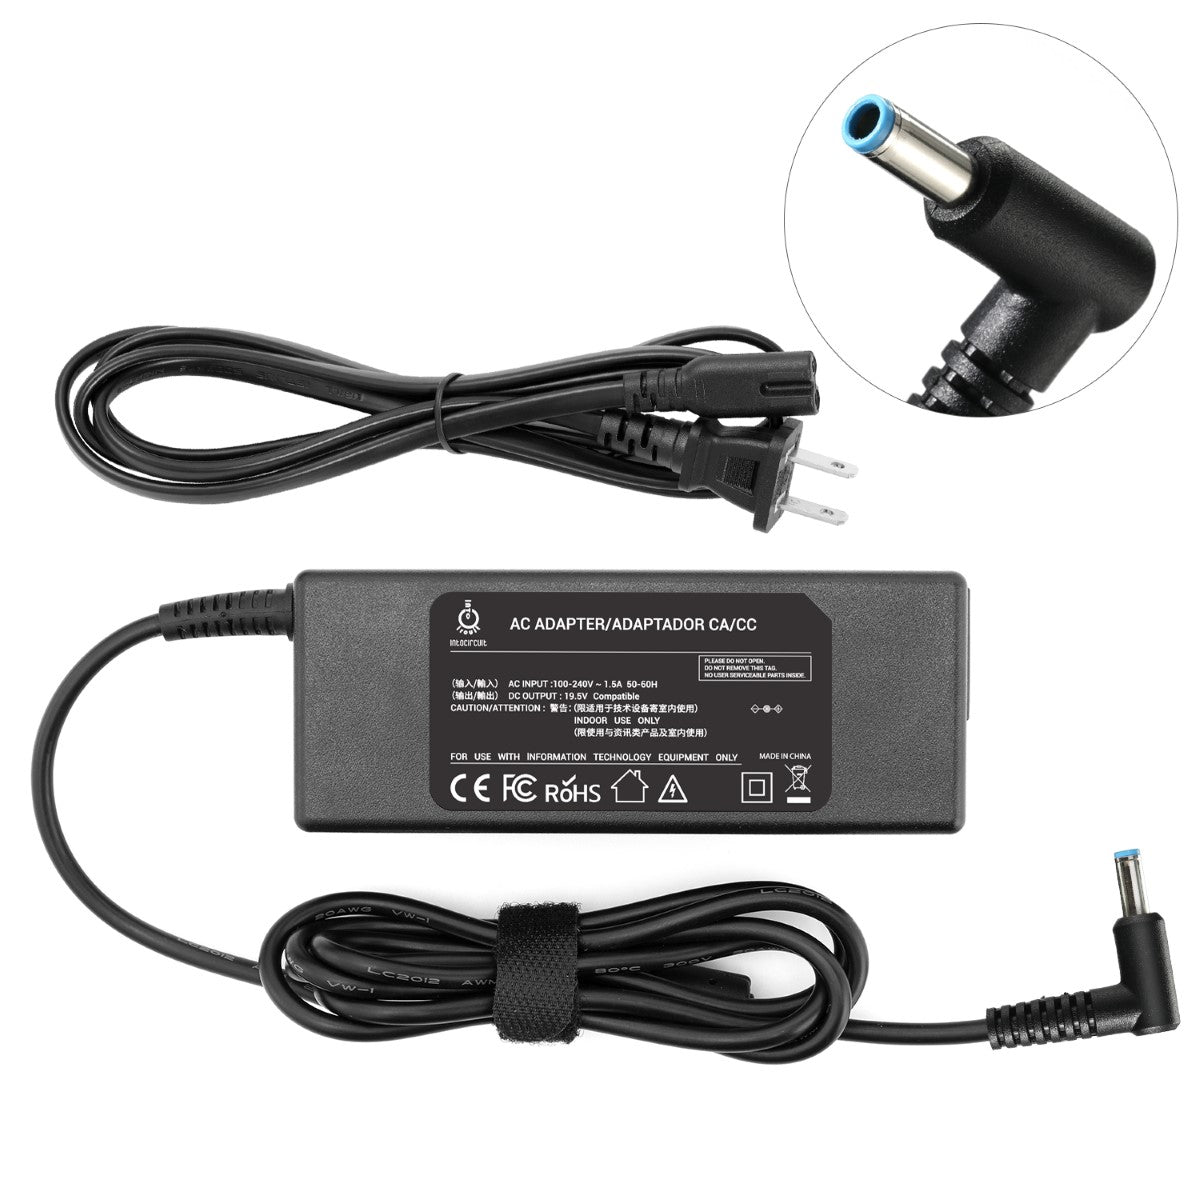 Charger for HP 15t-eb100 Spectre x360 Convertible Laptop